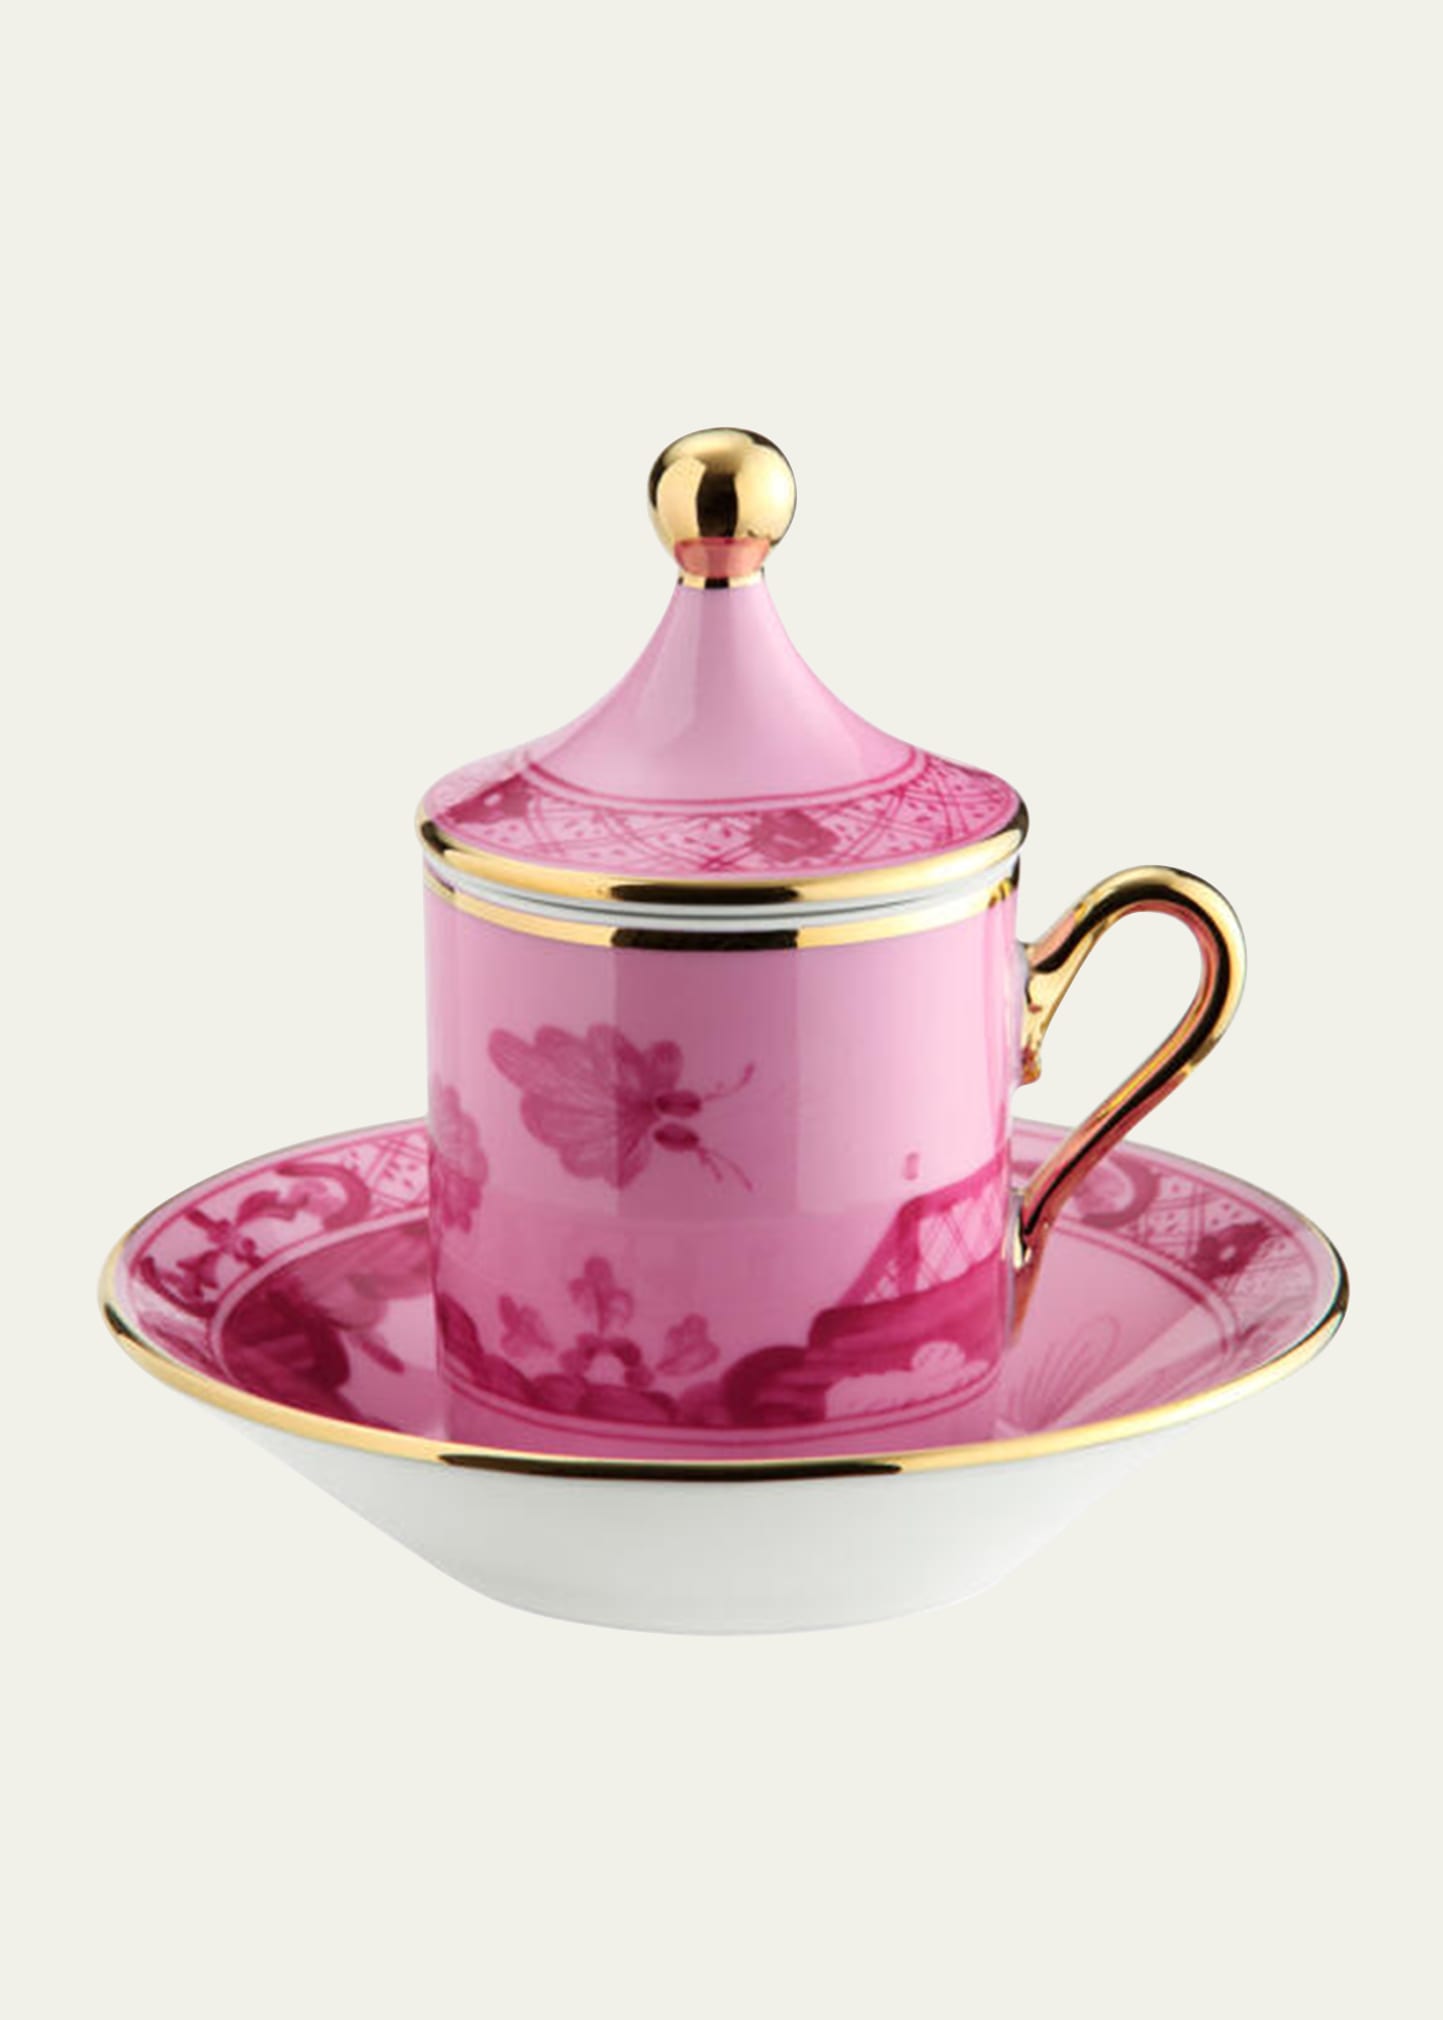 Empire-Style Coffee Cups & Saucers, Set of 2 - Pink